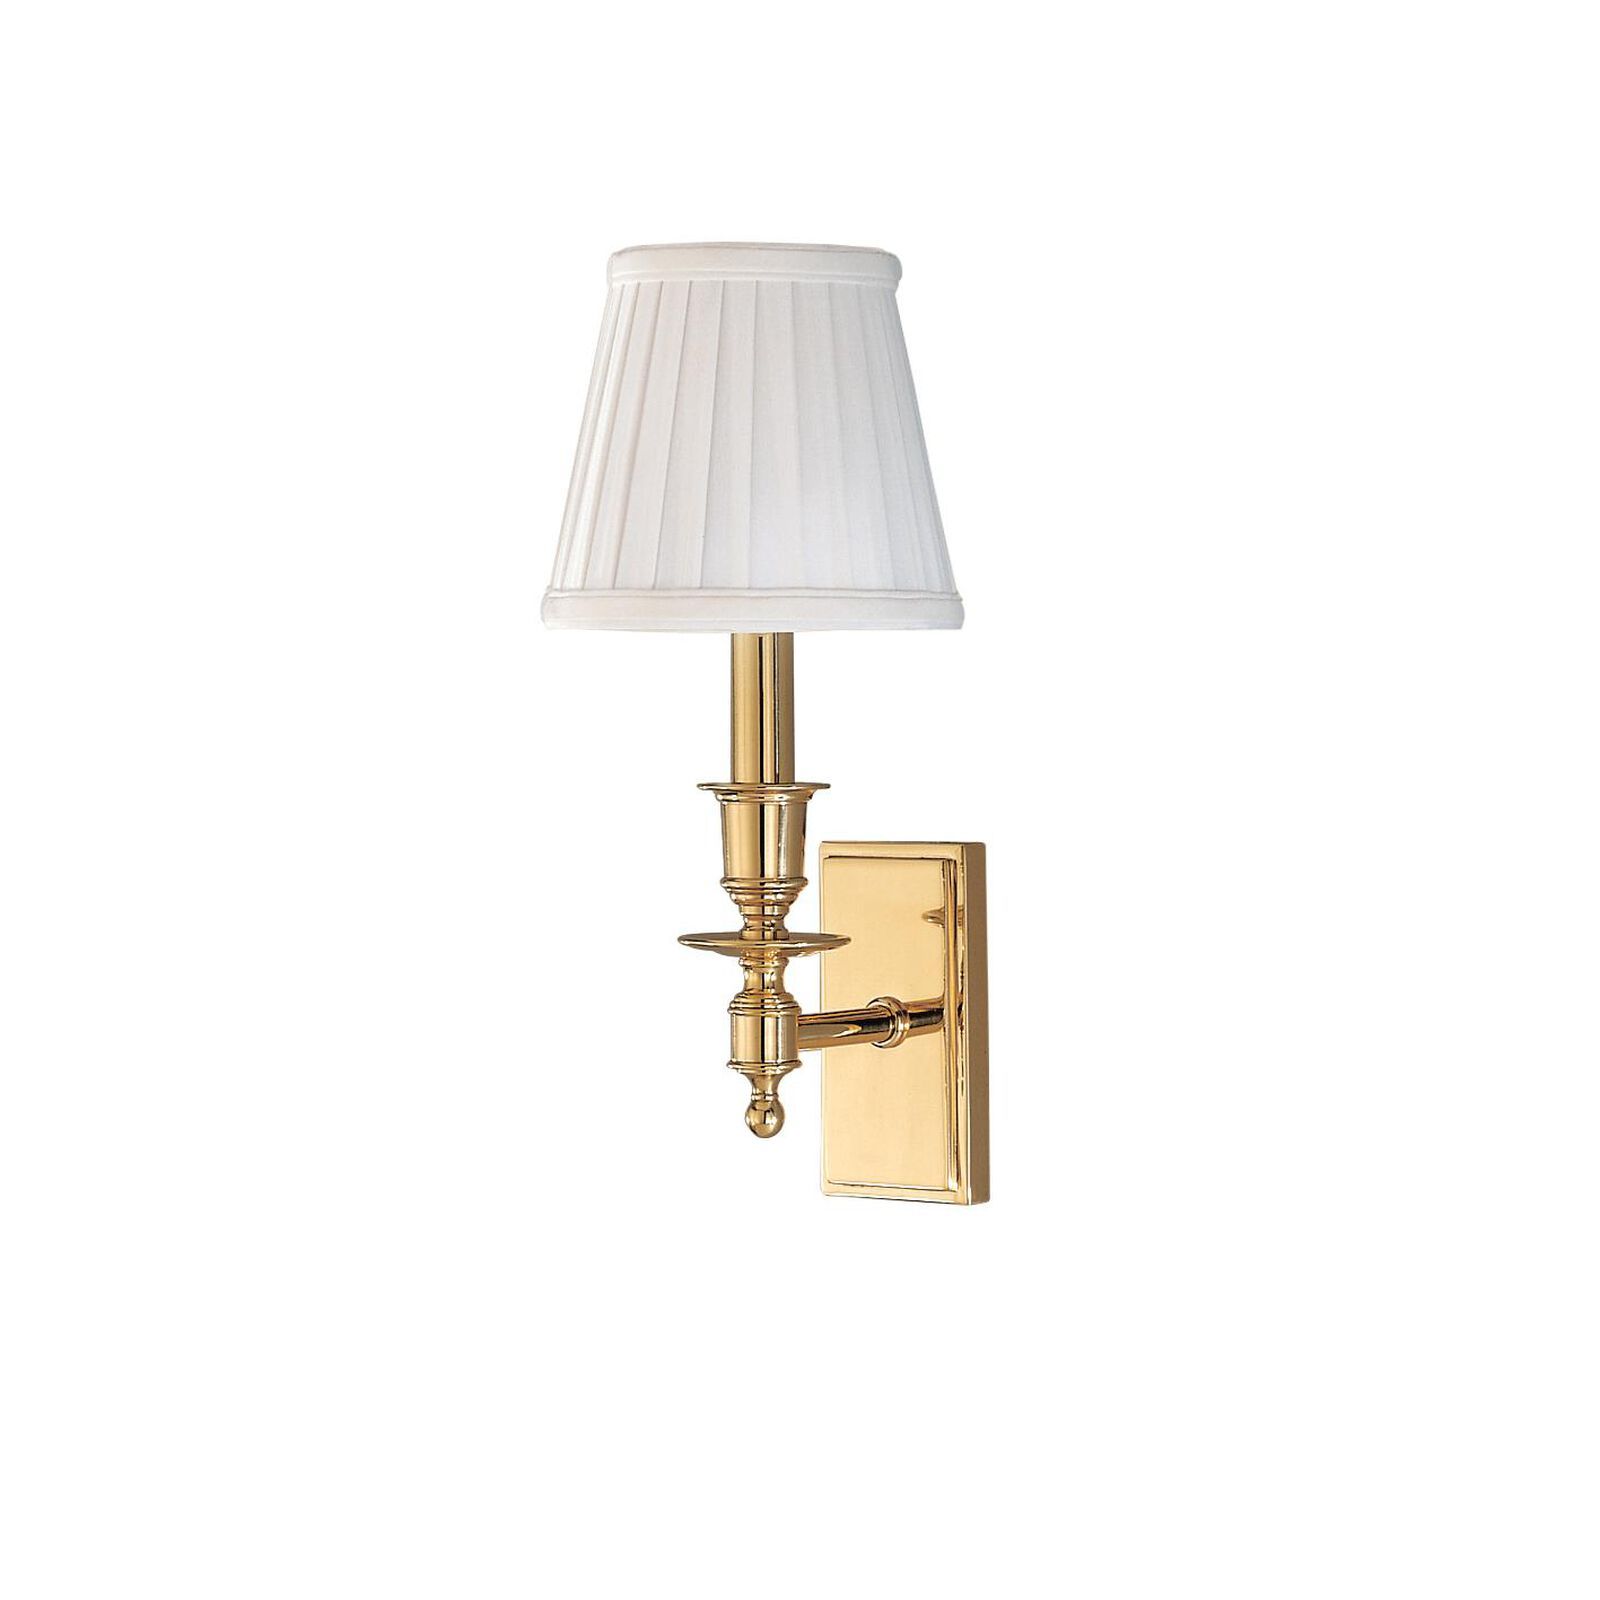 Ludlow 13 Inch Wall Sconce by Hudson Valley Lighting | Capitol Lighting 1800lighting.com